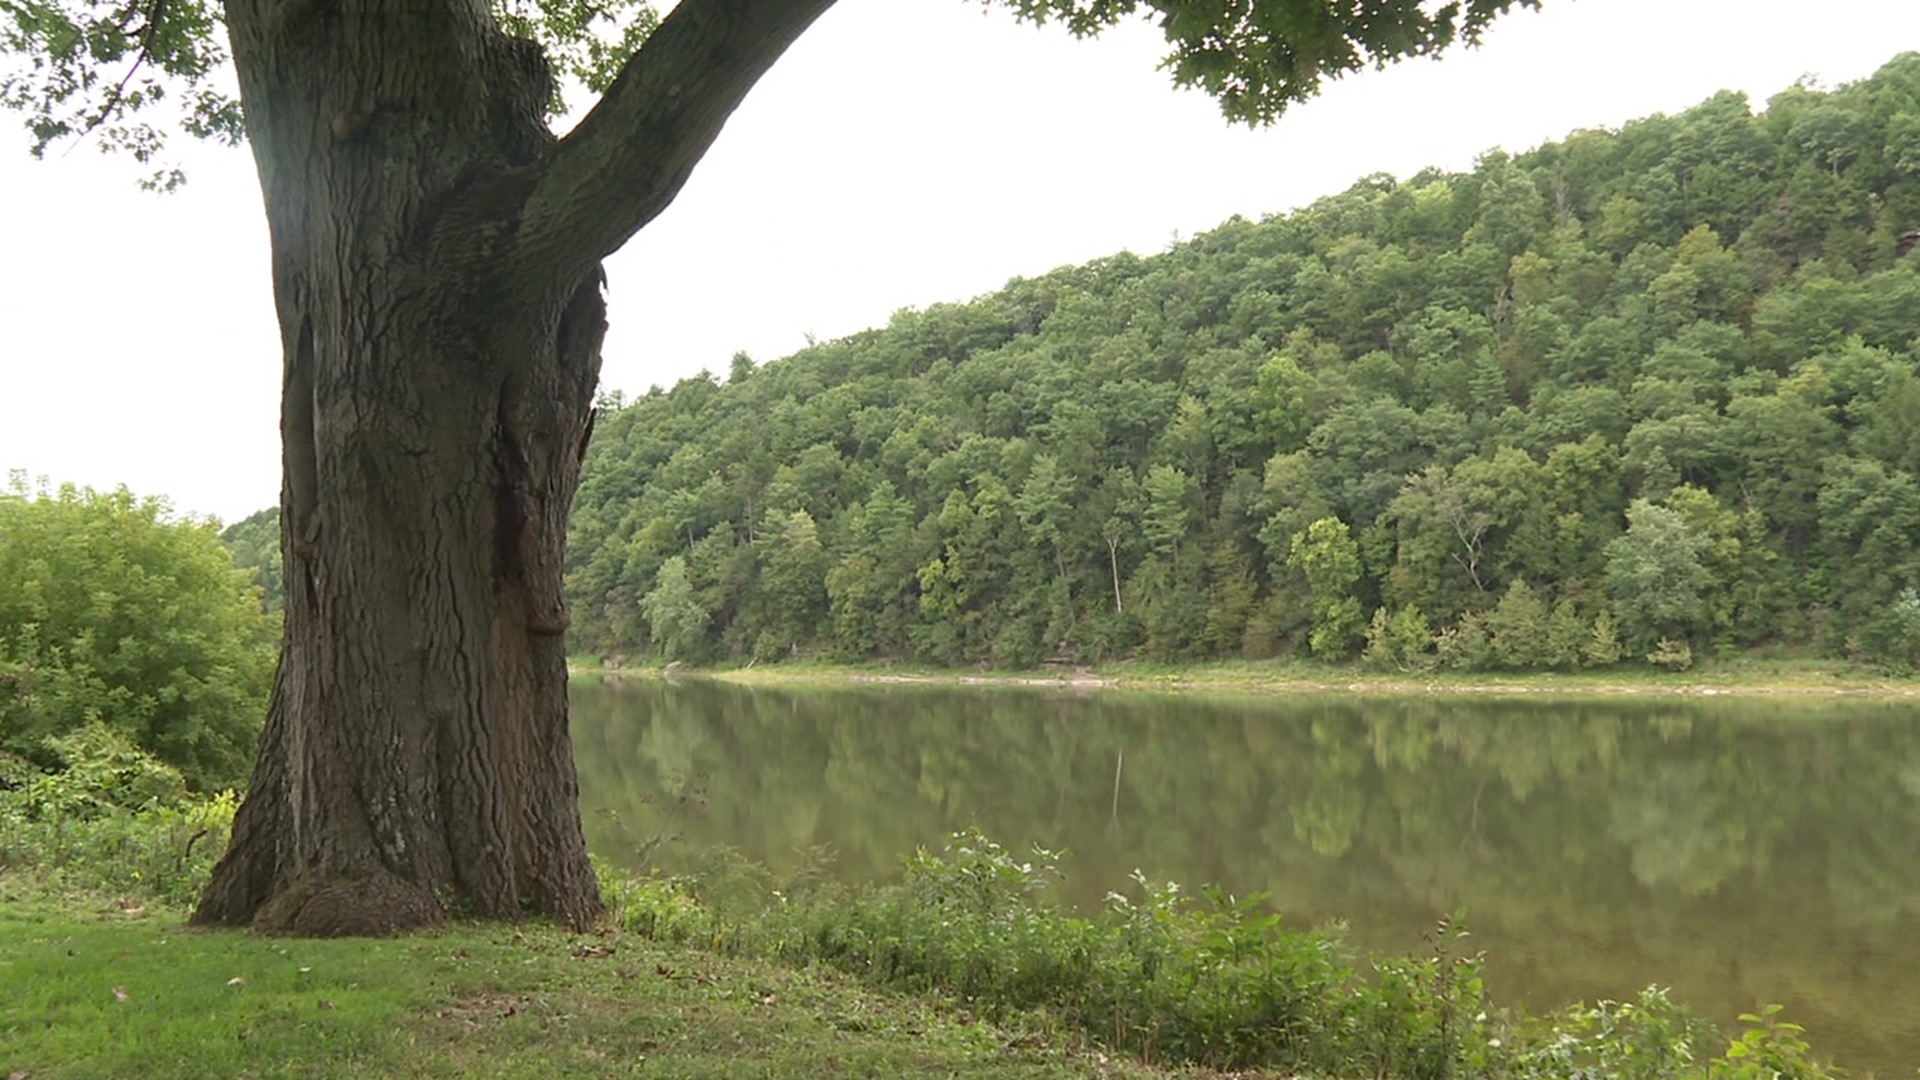 Folks in and around Wyoming County will have another place to enjoy the great outdoors. The county's first state park is on the way.